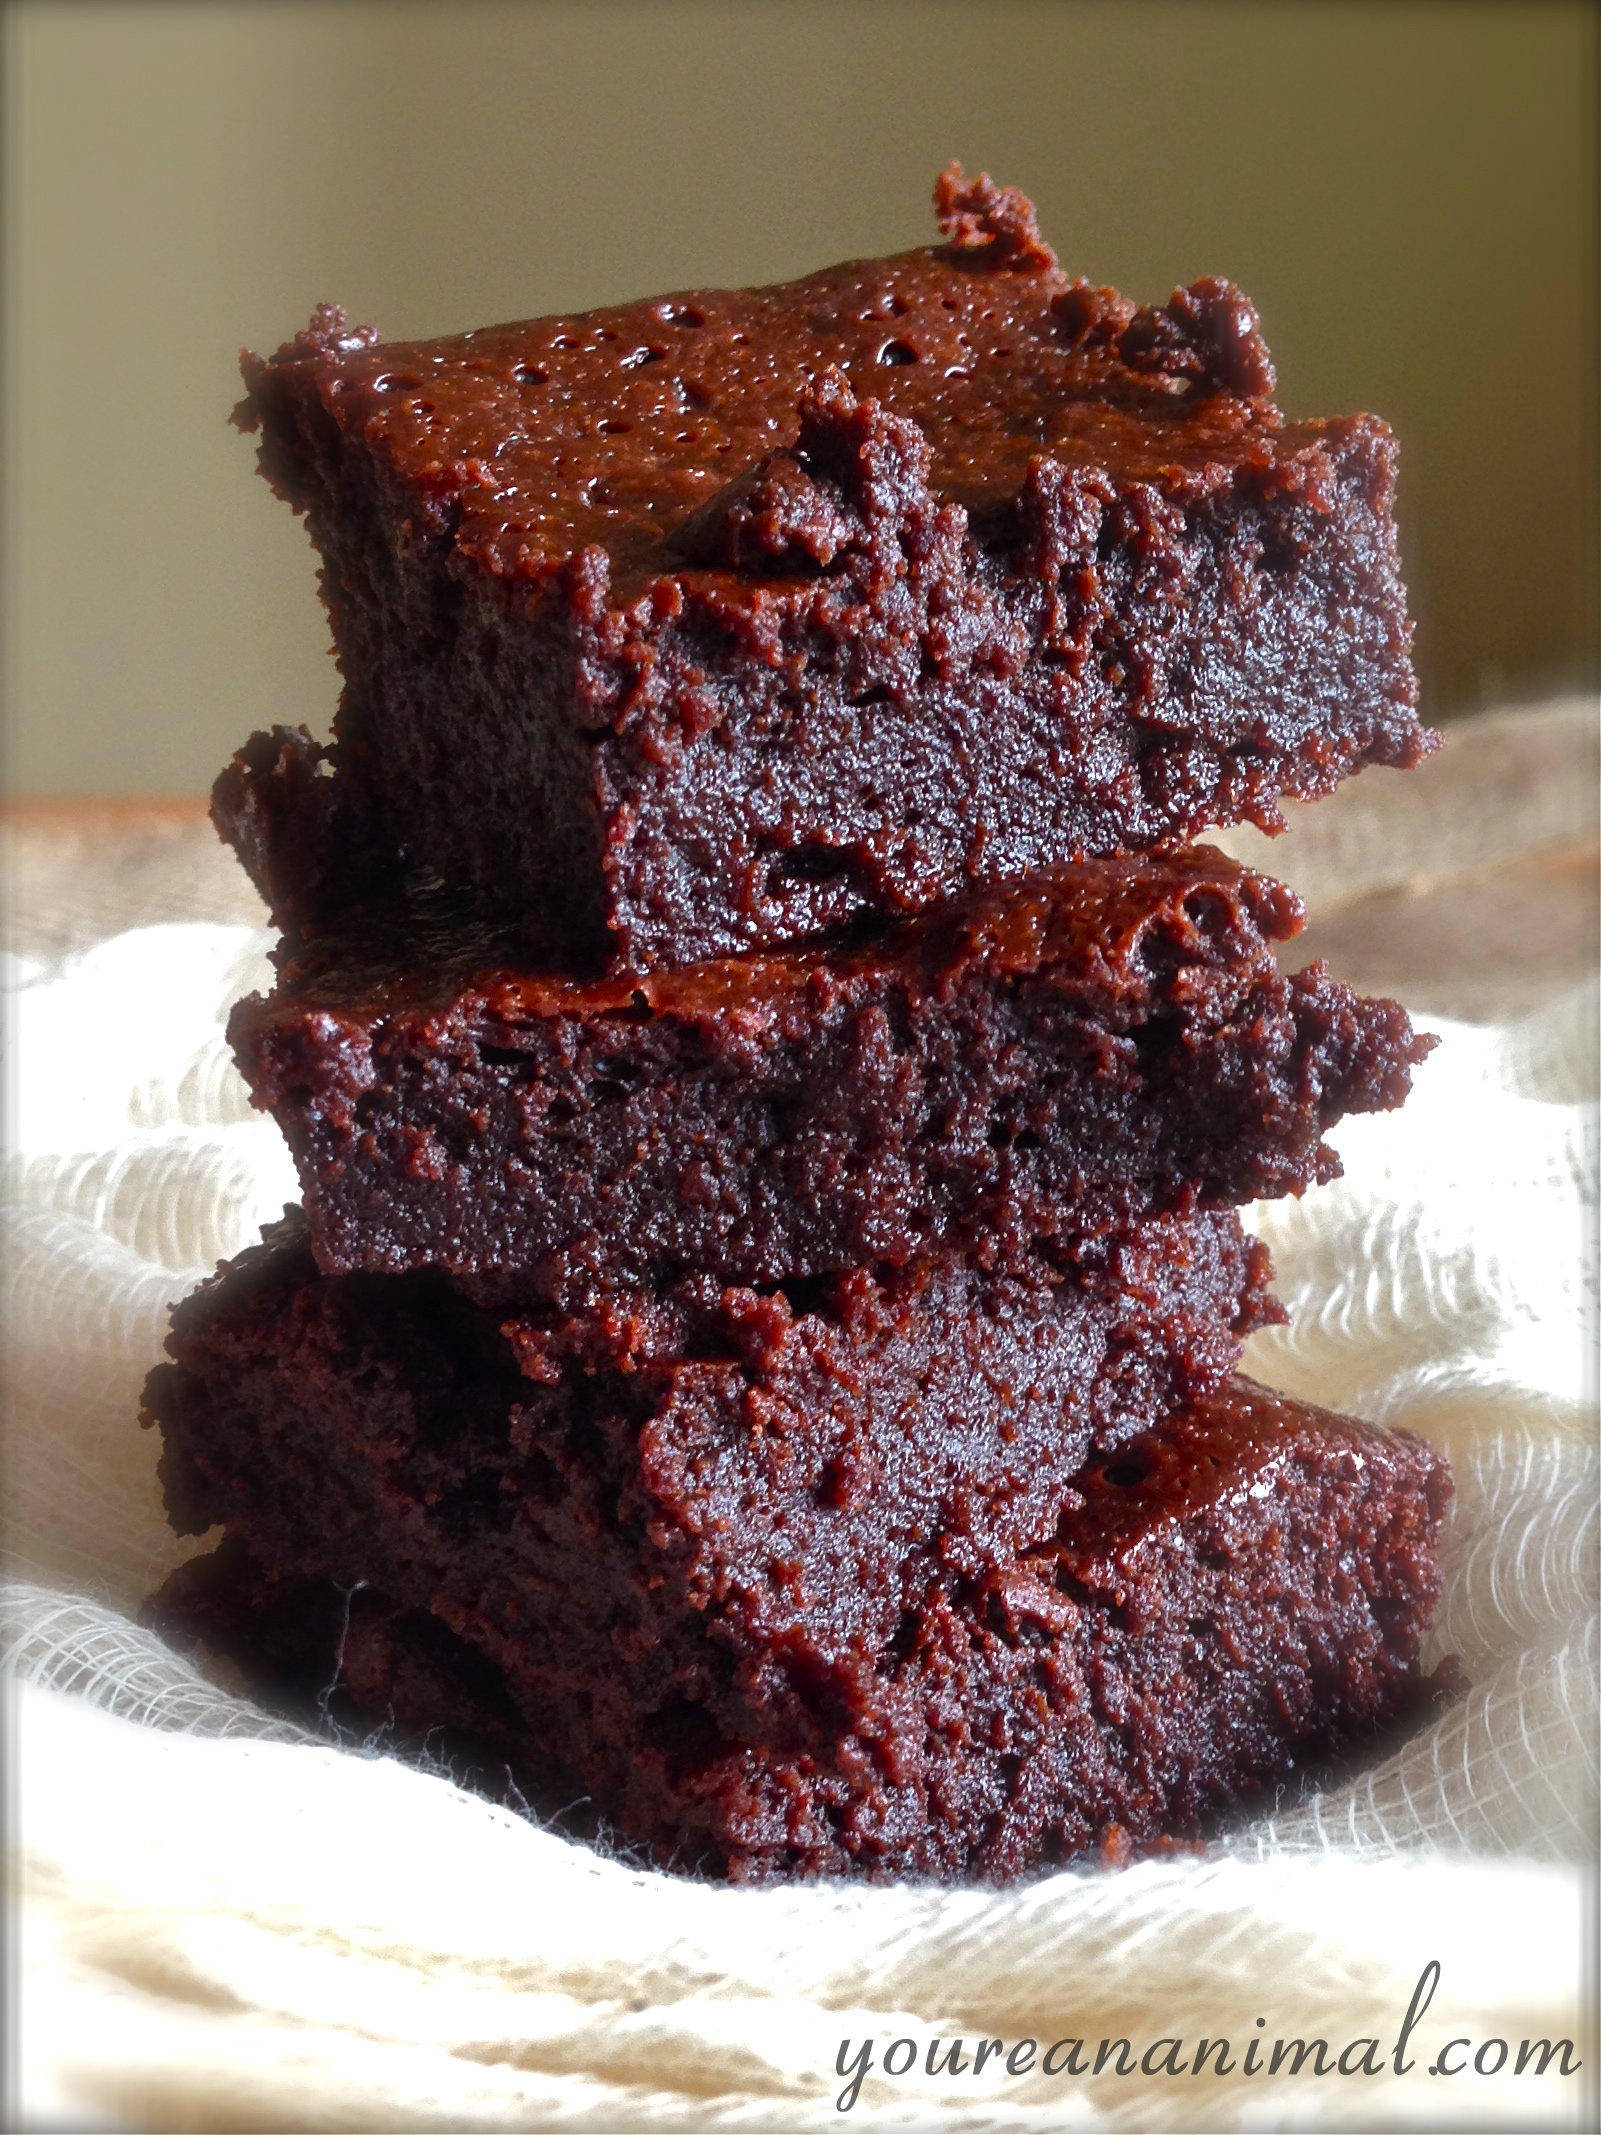 ClassicBrownies1